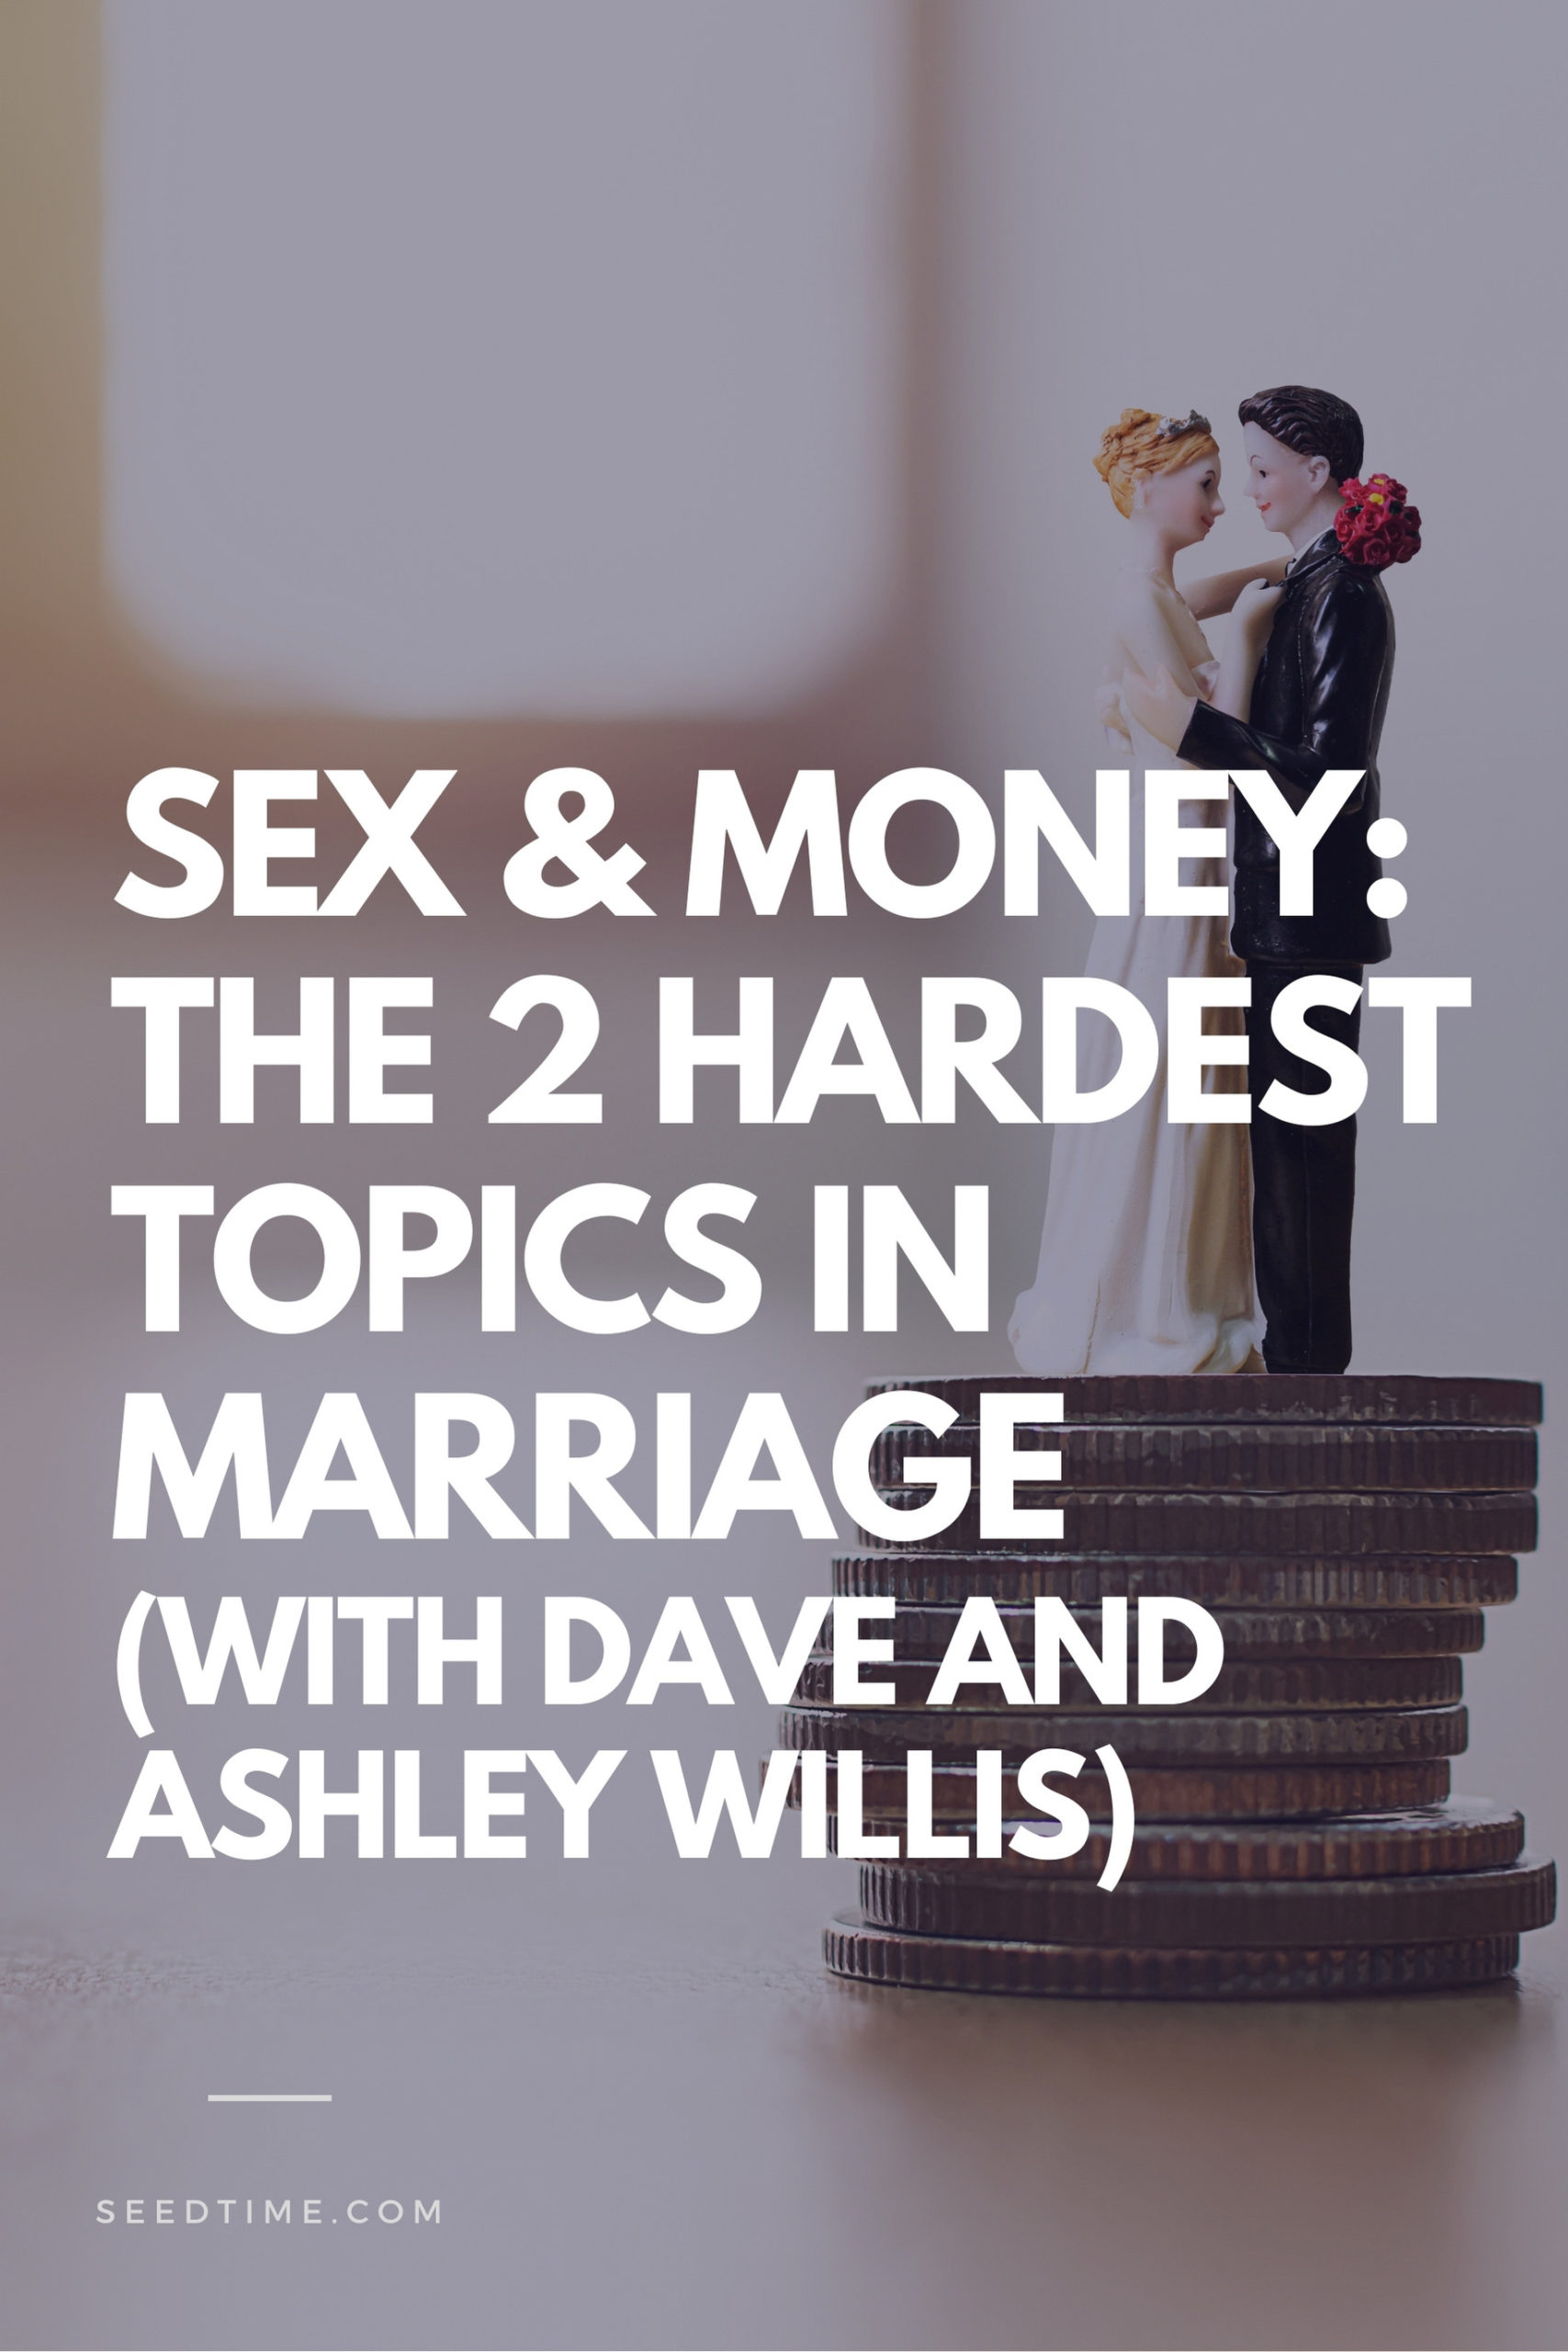 Hardest topics in marriage to talk about